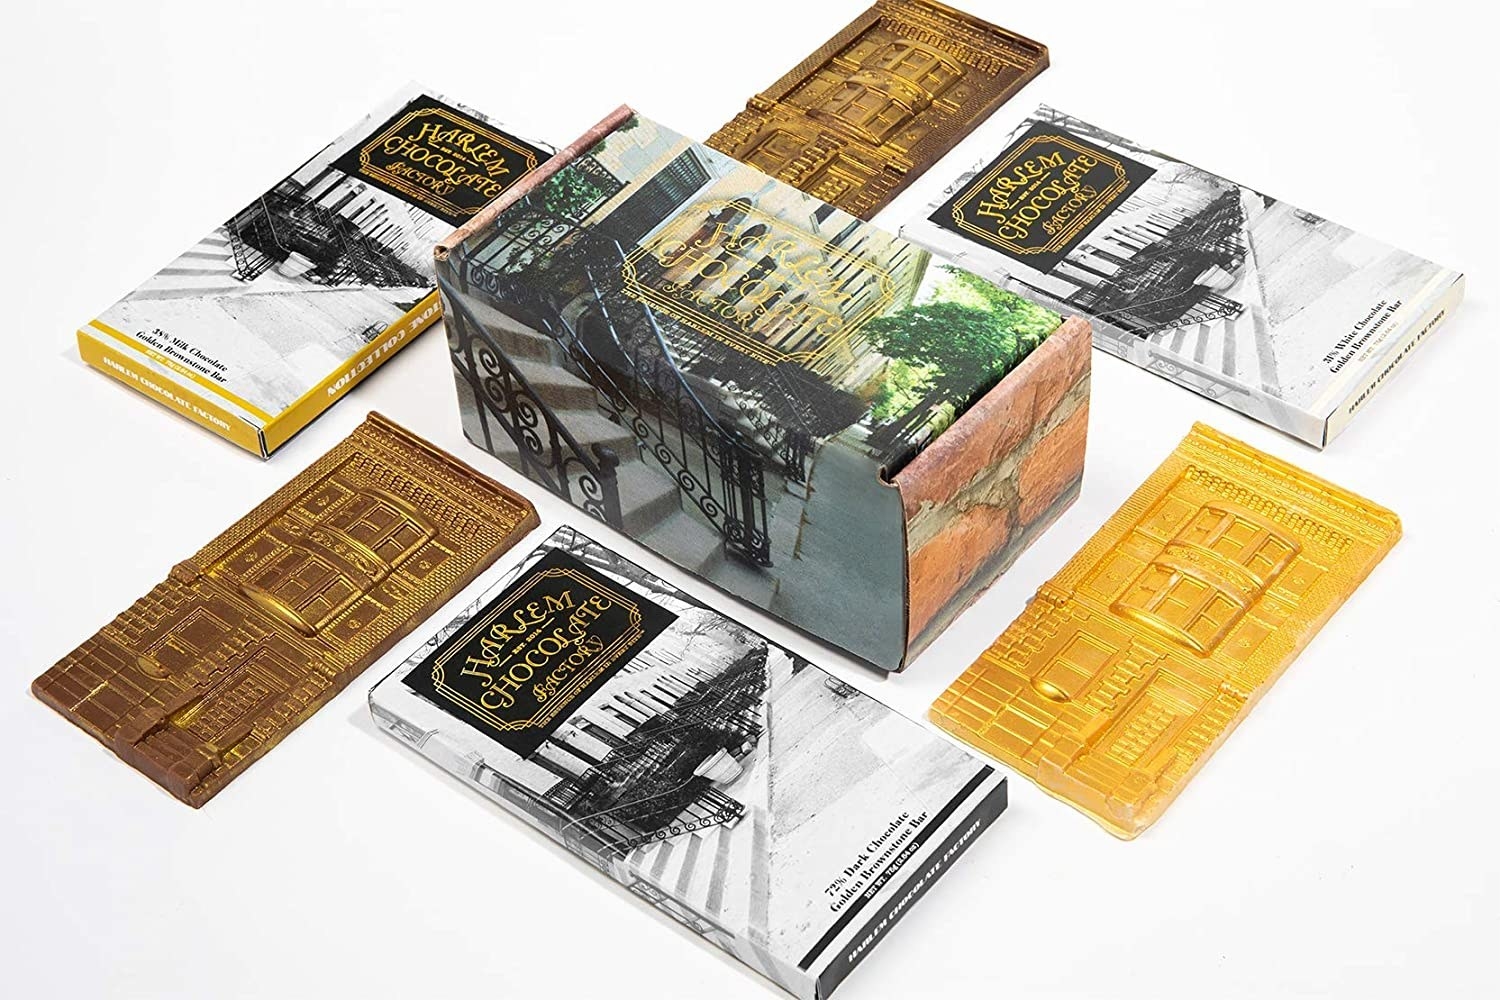 The box, decorated with an image of Harlem buildings, and the six individually wrapped bars